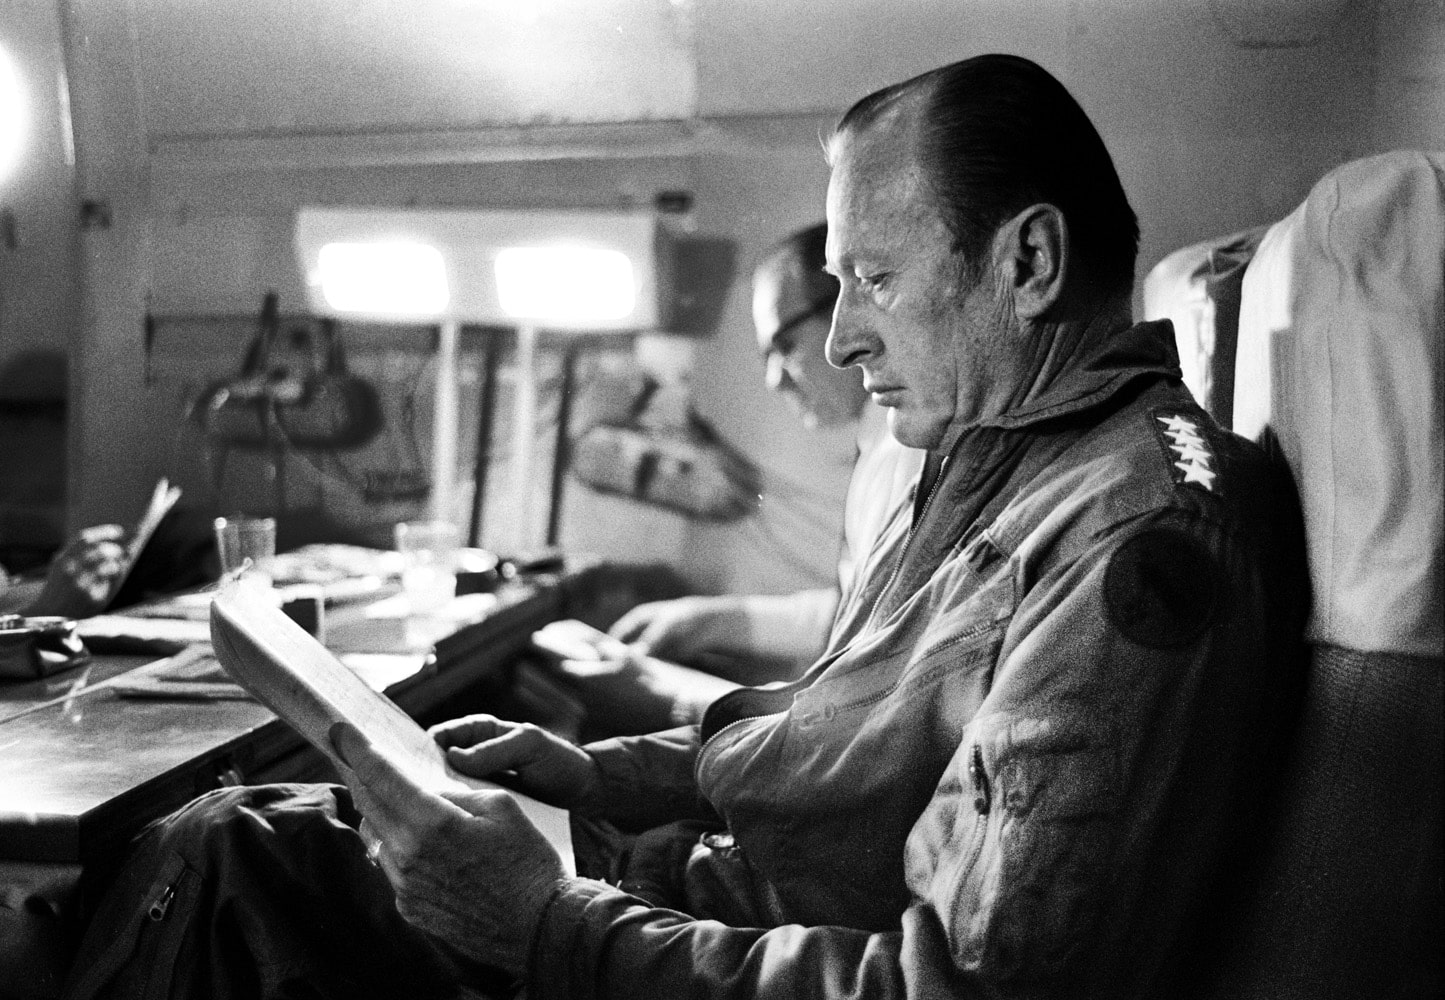 On the flight from Saigon to the U.S. Weyand prepares his report for the president